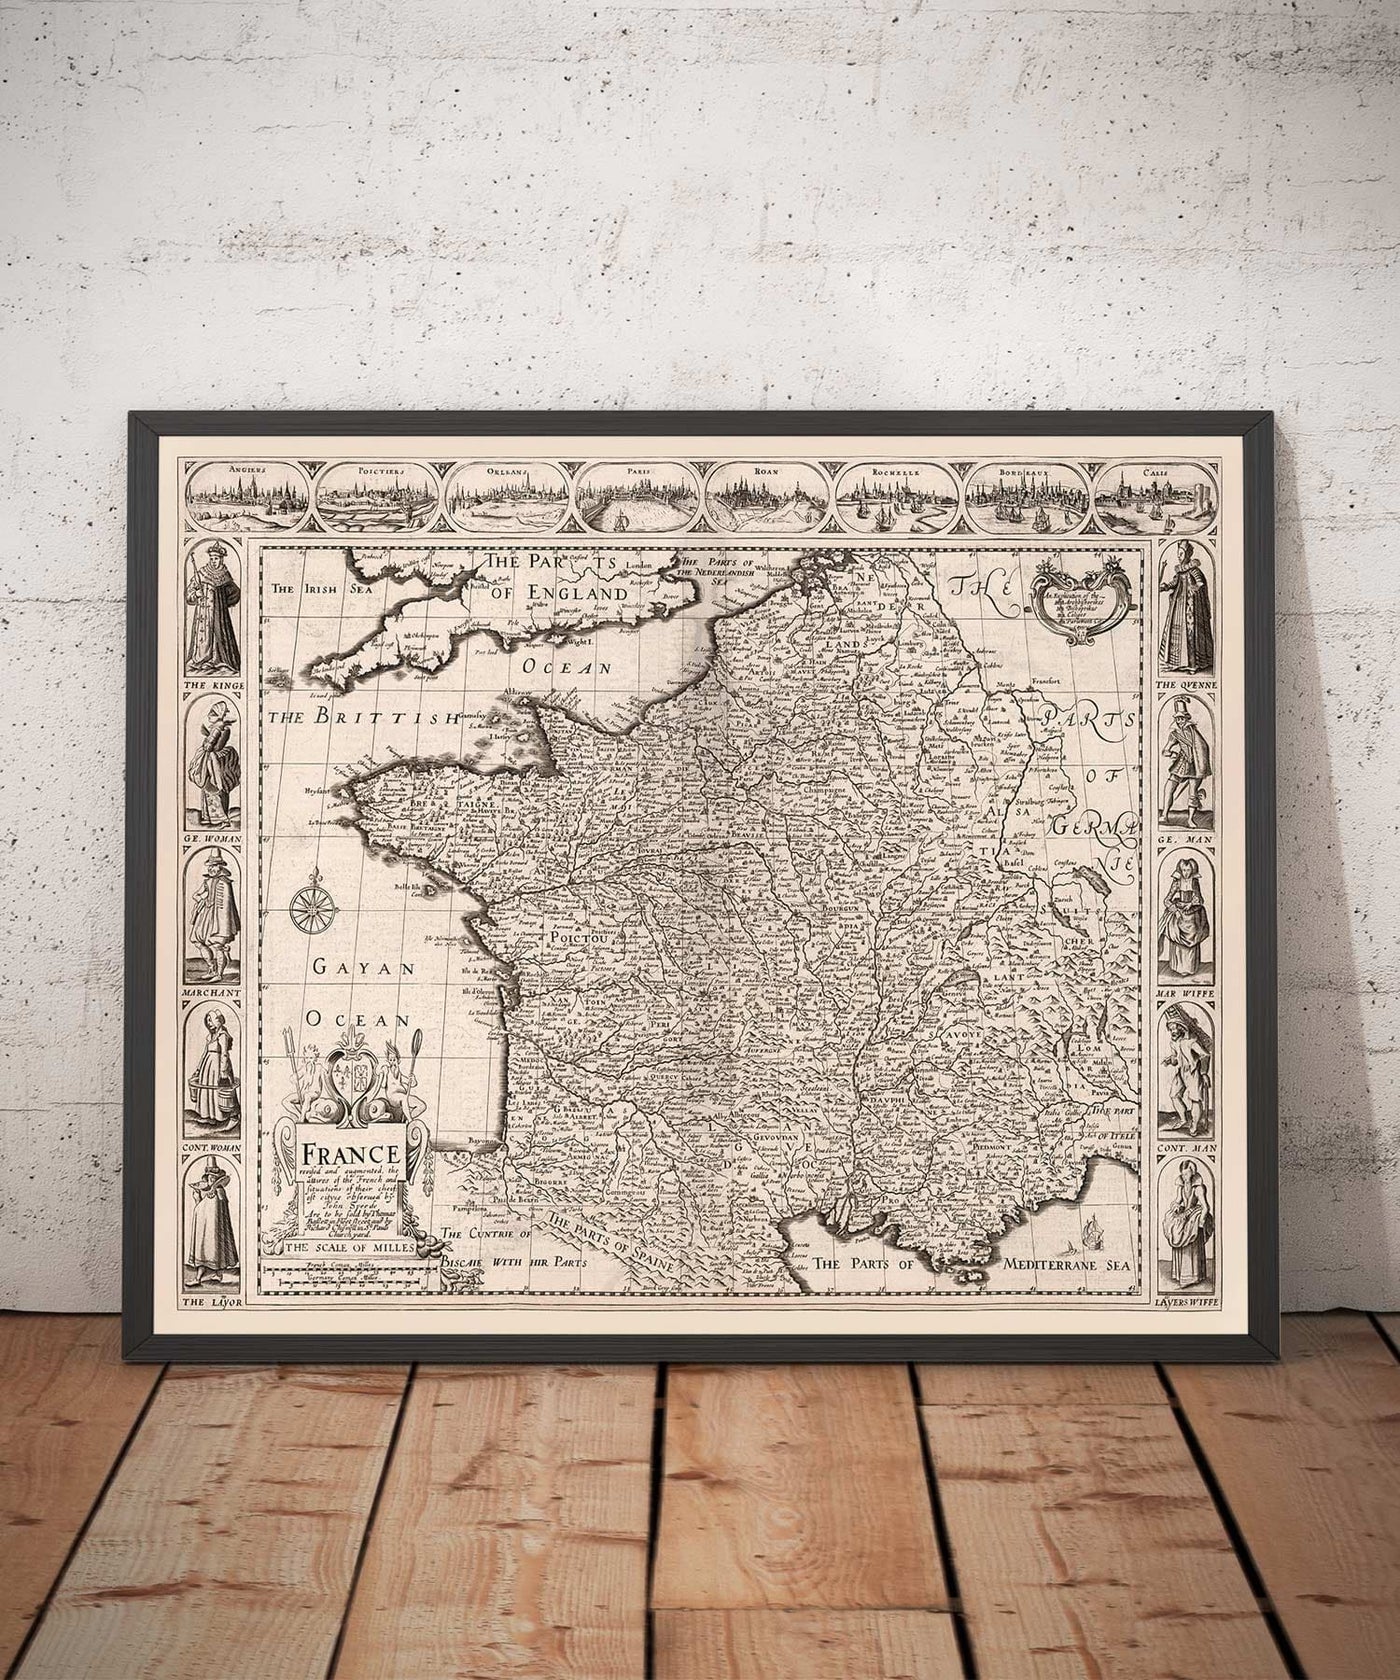 Old Map of France, 1627 by John Speed - Belgium, Normandy, Brittany, Cote d'Azur, Pyrenees